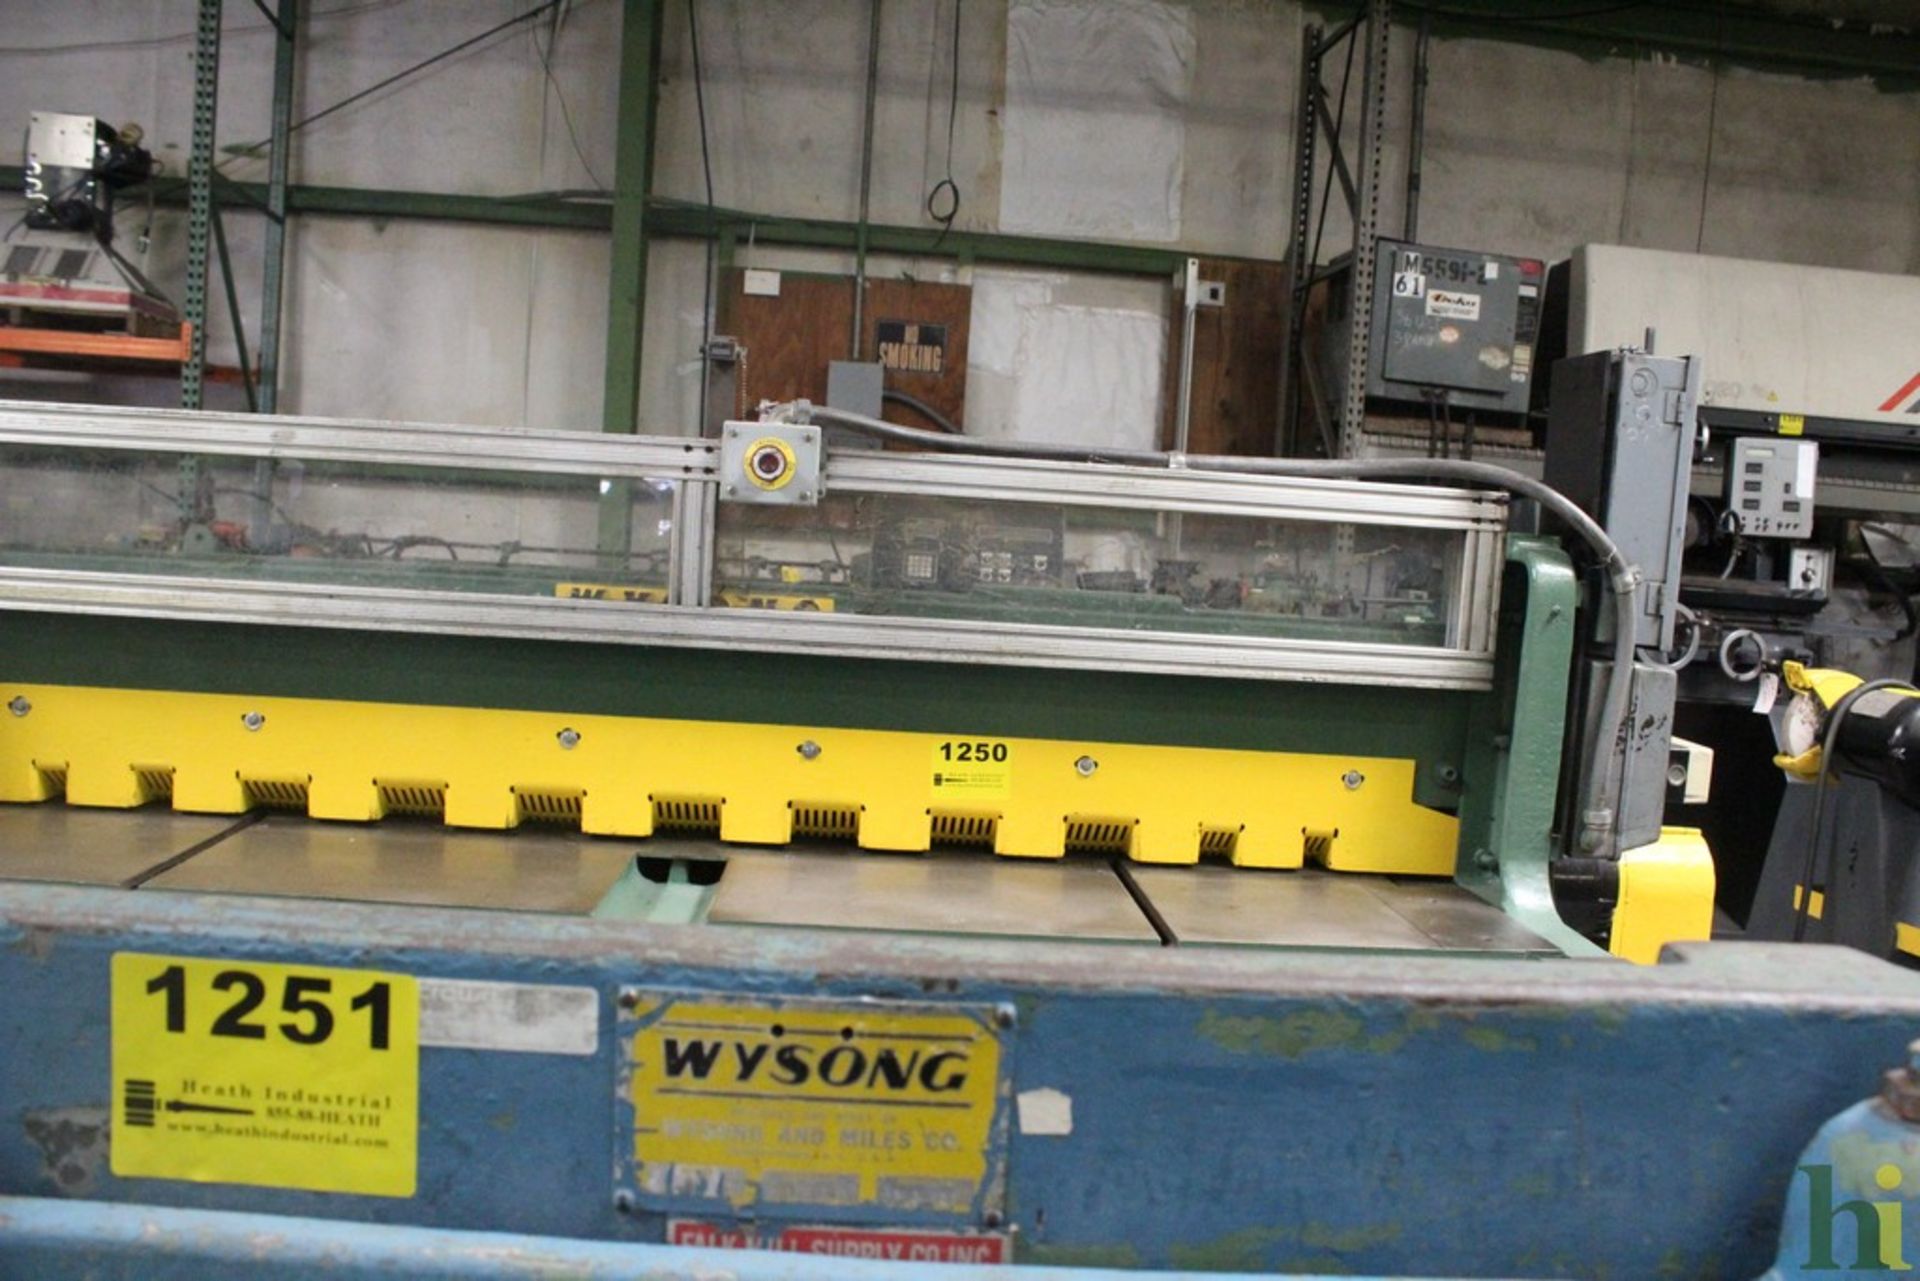 WYSONG 12 GAUGE X 52” MODEL 252 SHEAR, S/N P13-335 - Image 3 of 4